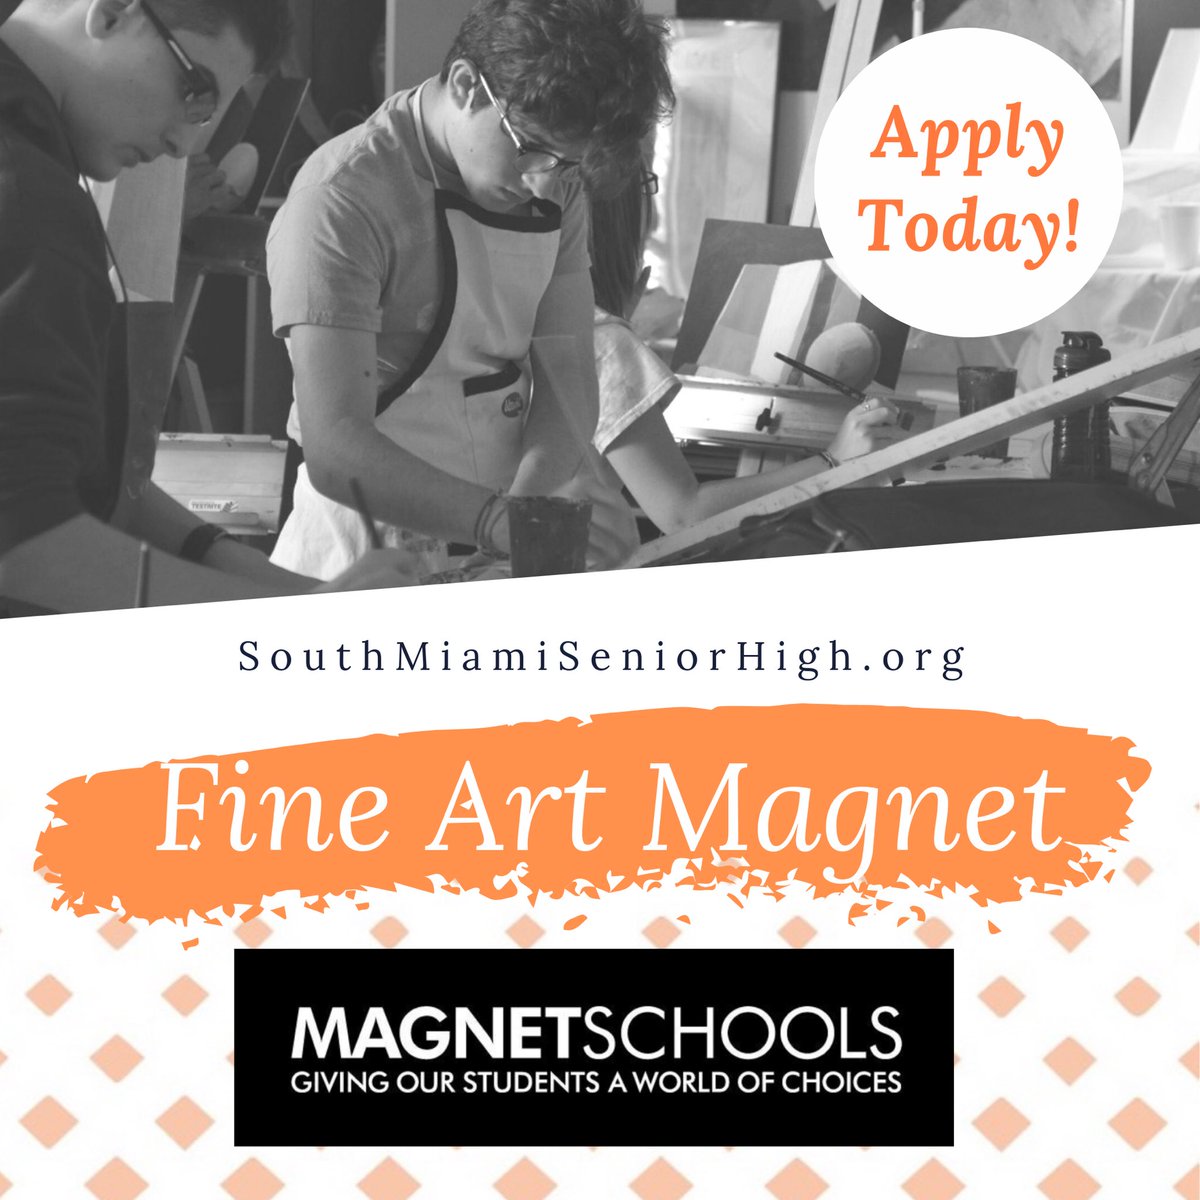 South Miami Senior High’s award-winning Magnet Fine Art program is now accepting applications. Visit yourchoicemiami.org between Oct.1 and Jan. 15 to apply!  #YourChoiceMiami #MagnetSchool #CobraCountry @miamischools @miamimagnets